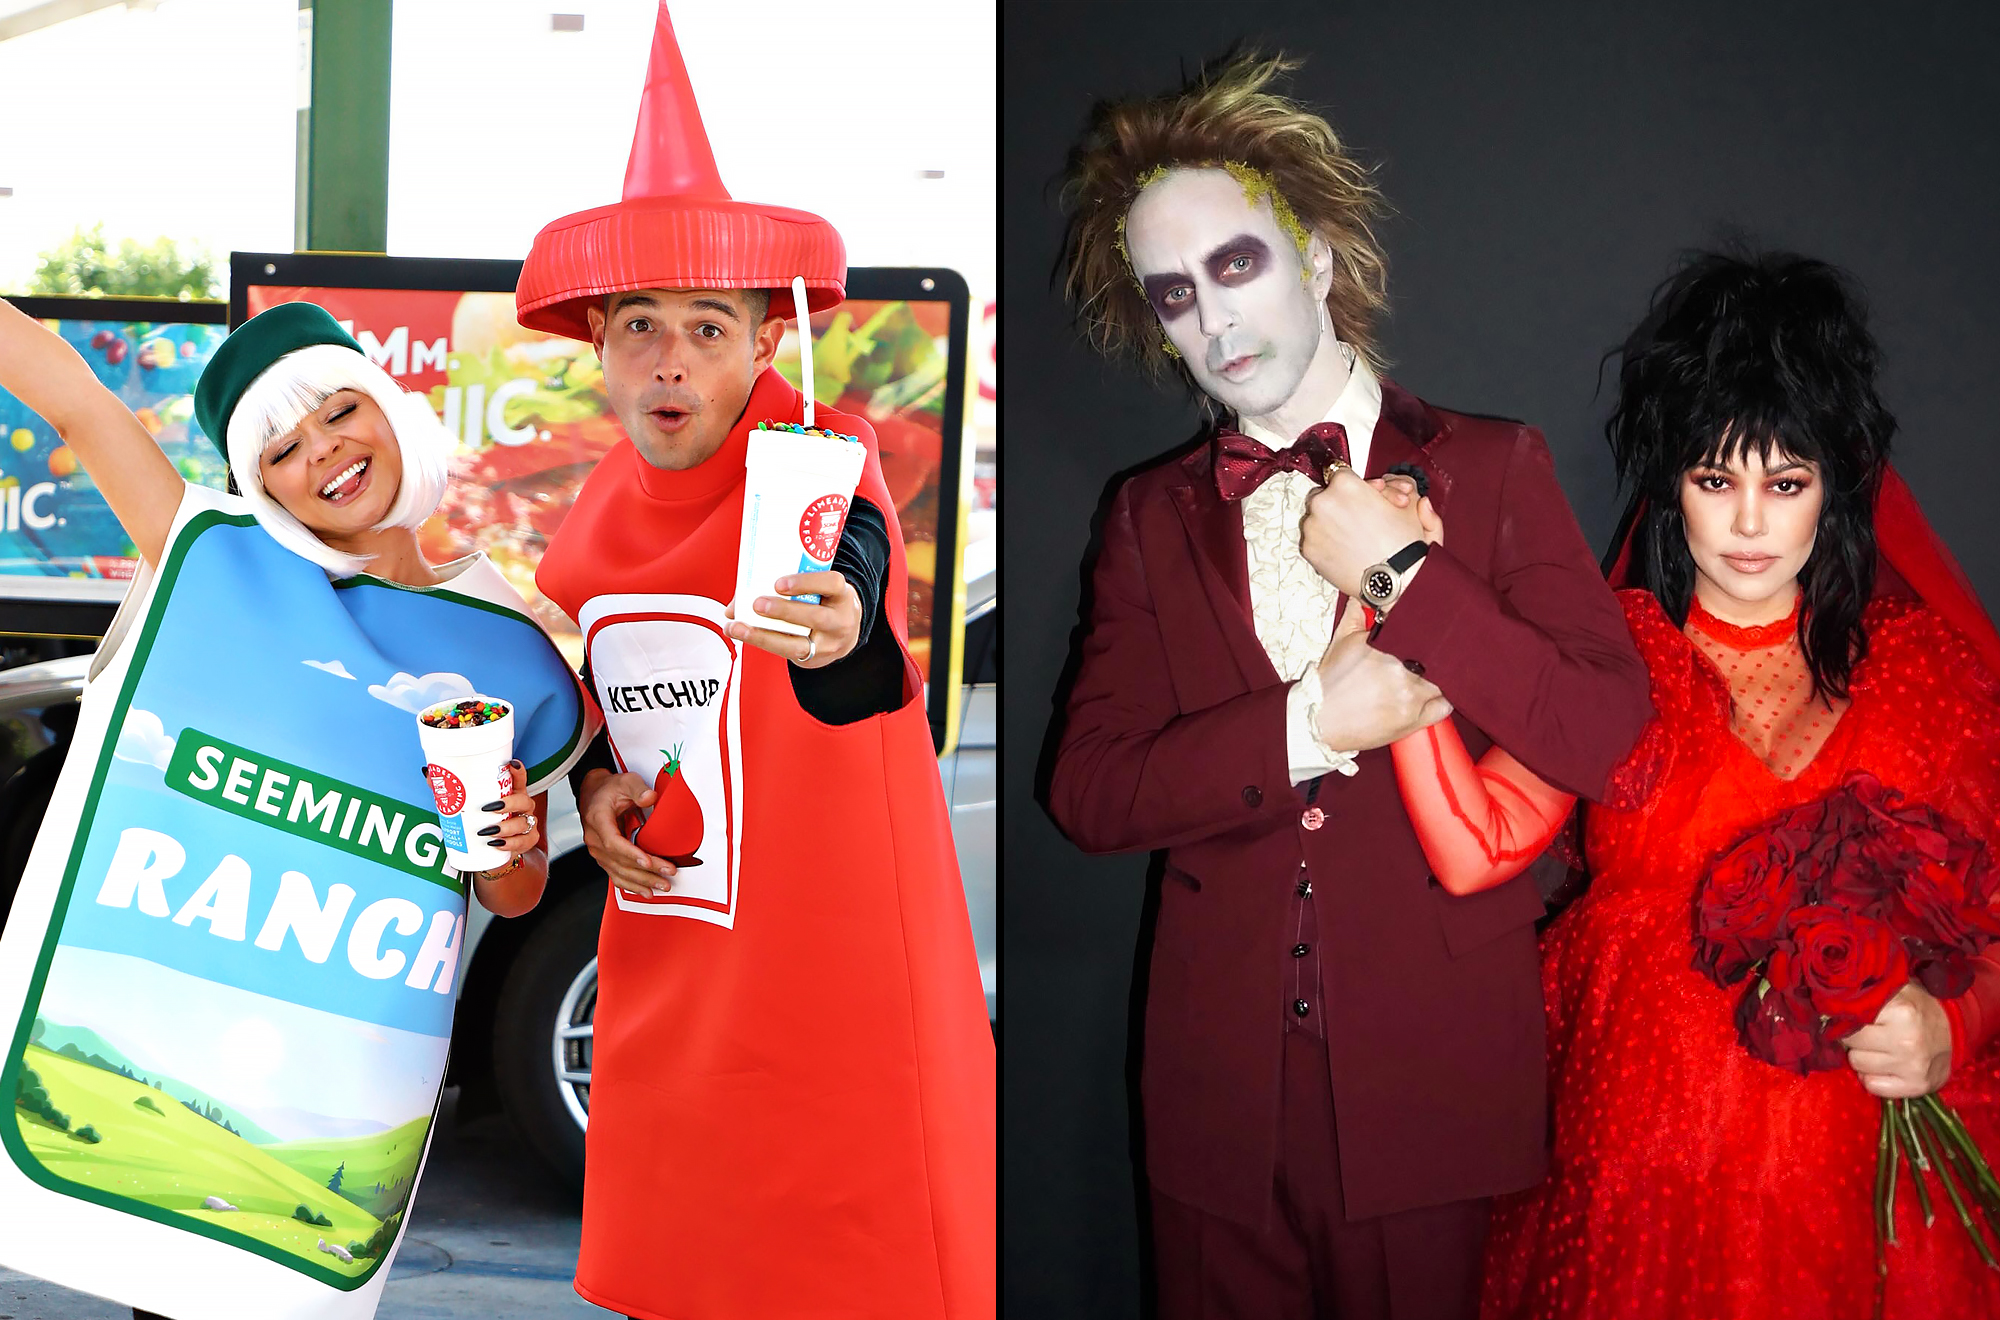 How to Recreate the 10 Most Popular Halloween Costume Ideas This Year